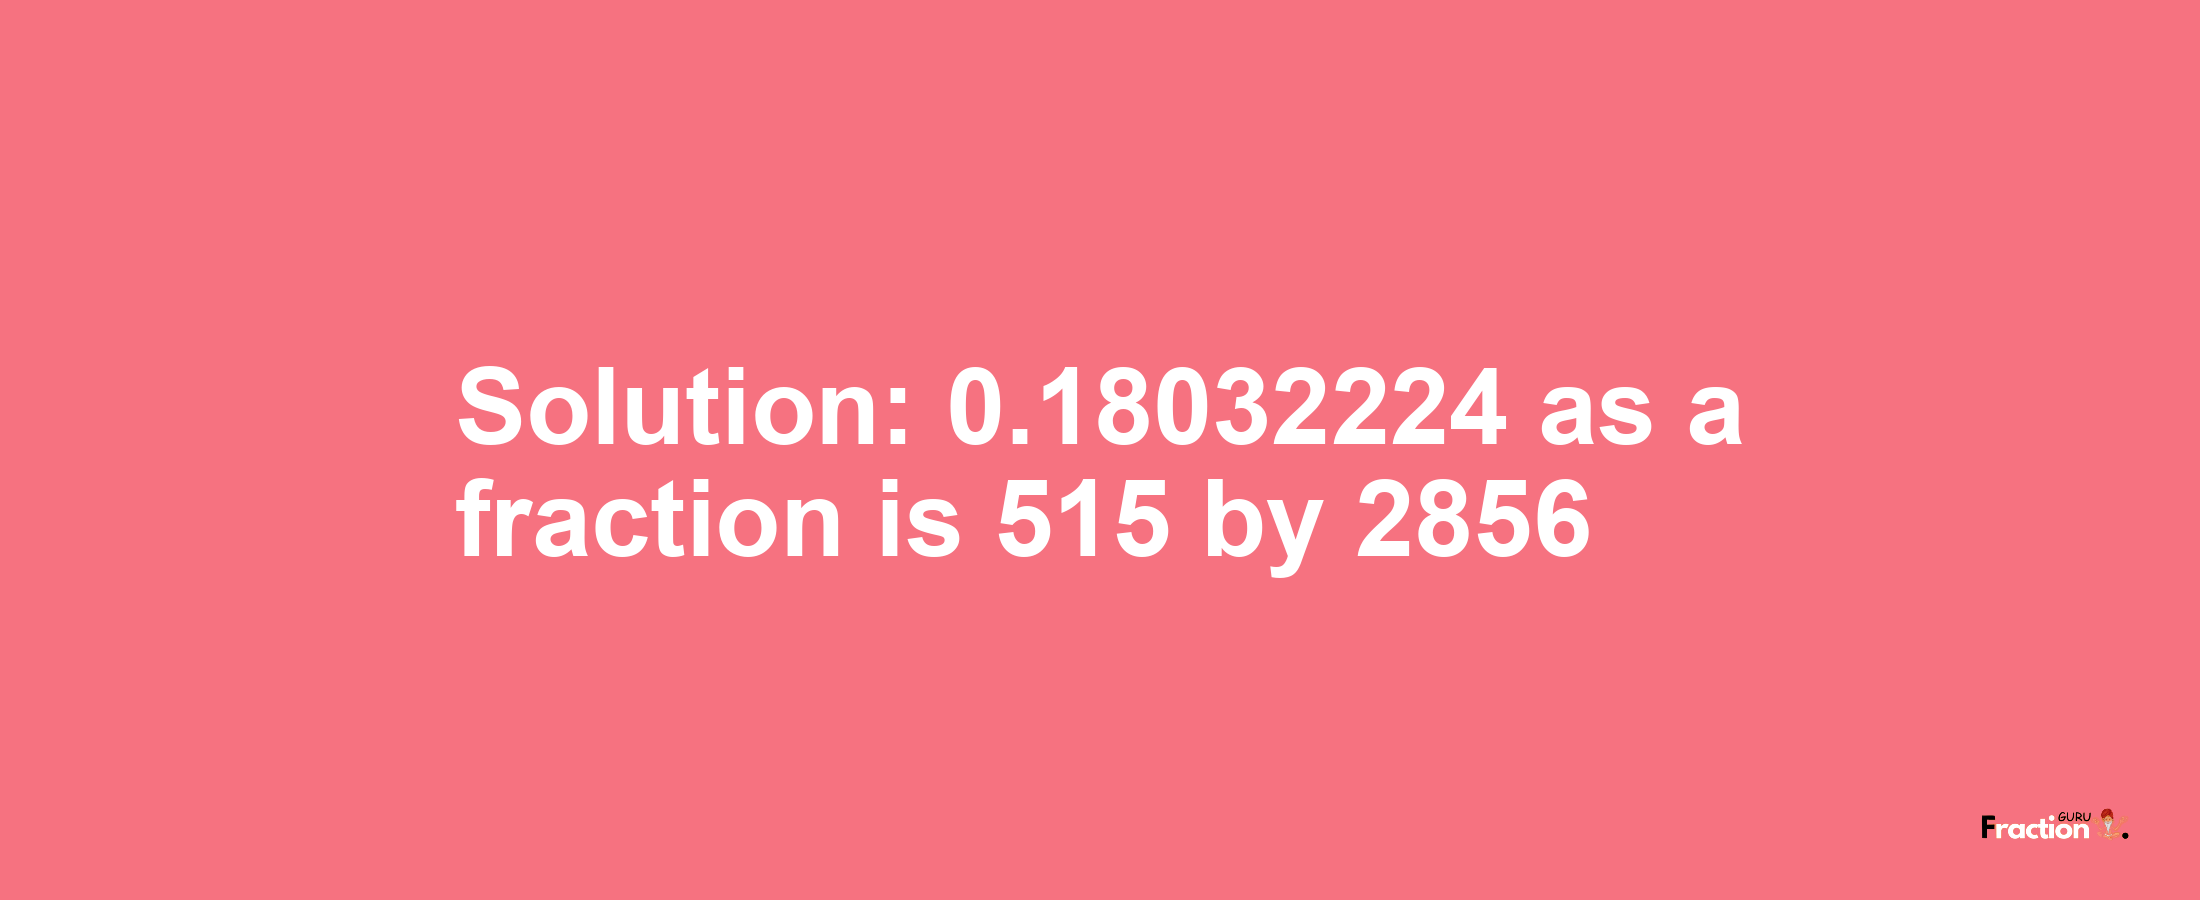 Solution:0.18032224 as a fraction is 515/2856